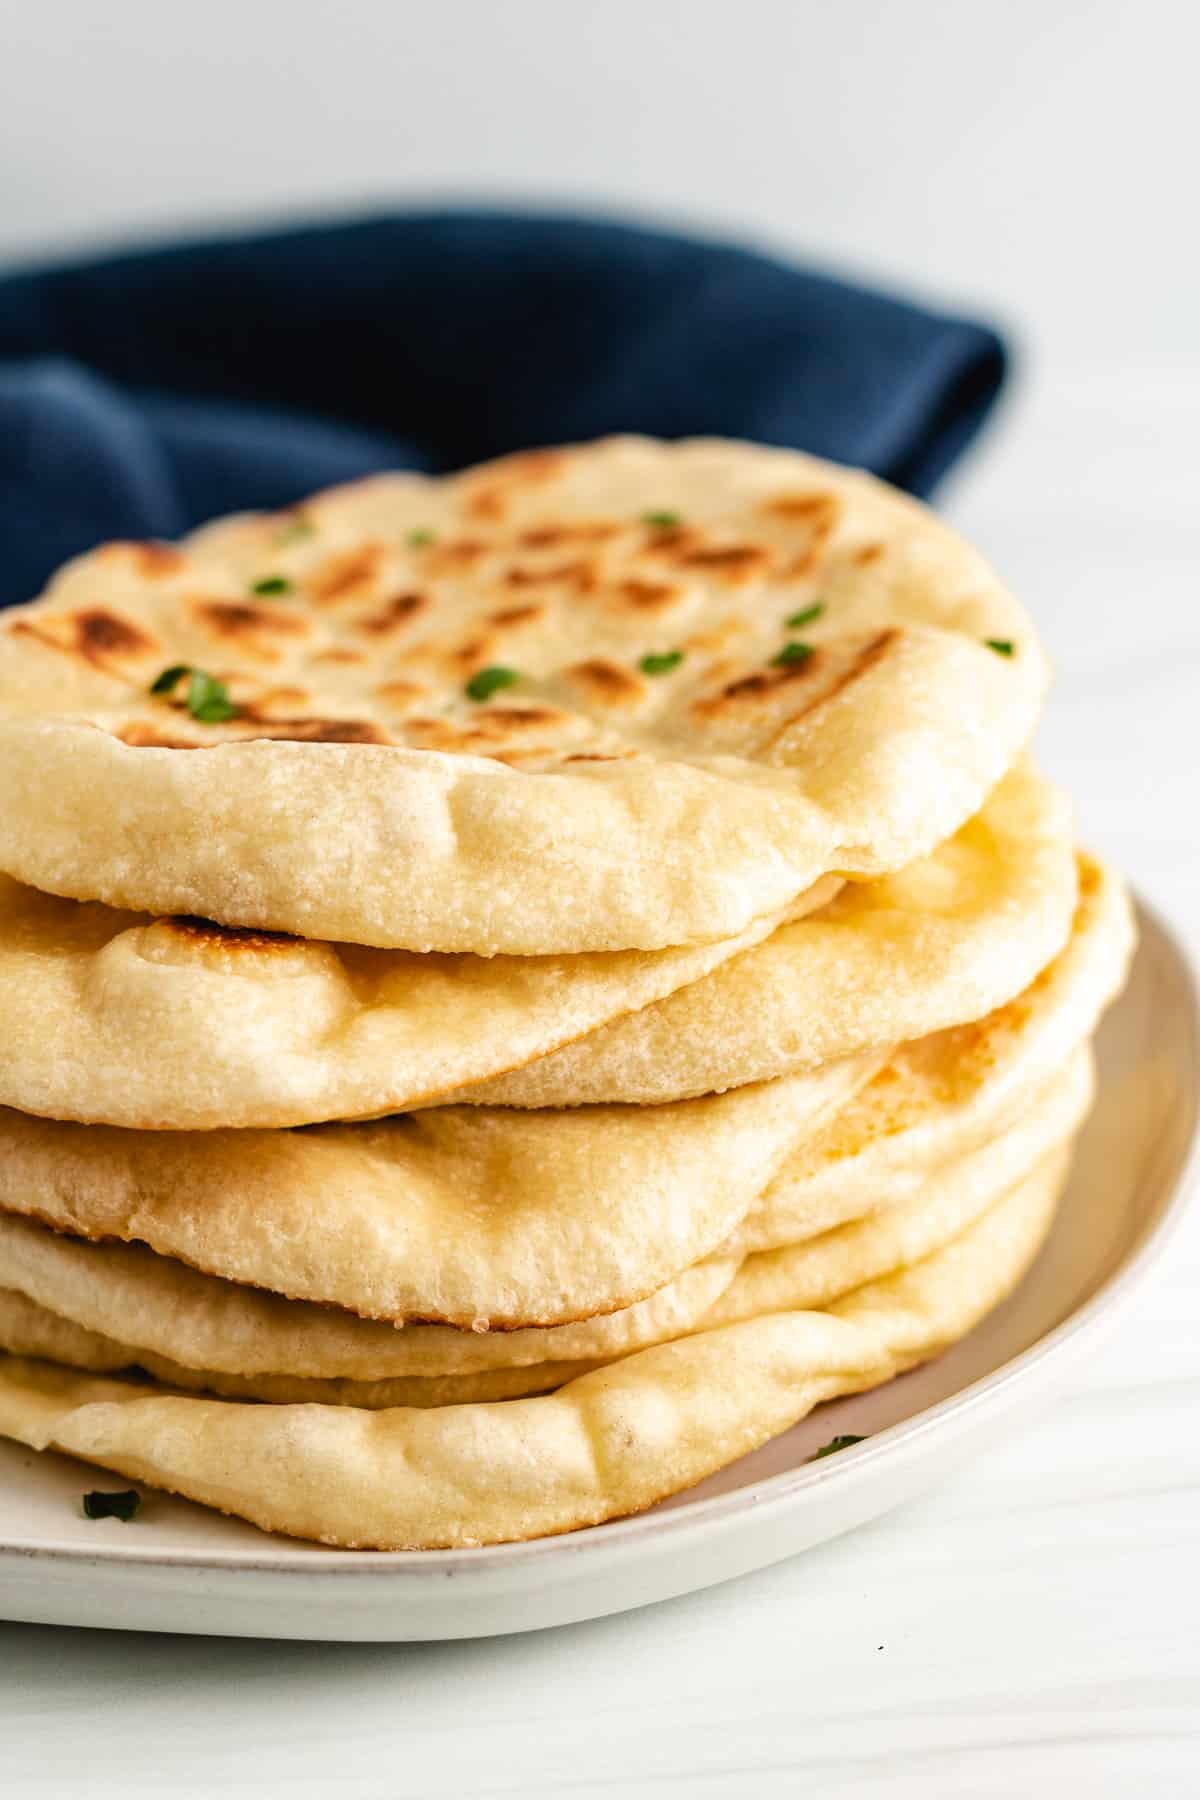 Stack of naan bread with a blue linen.